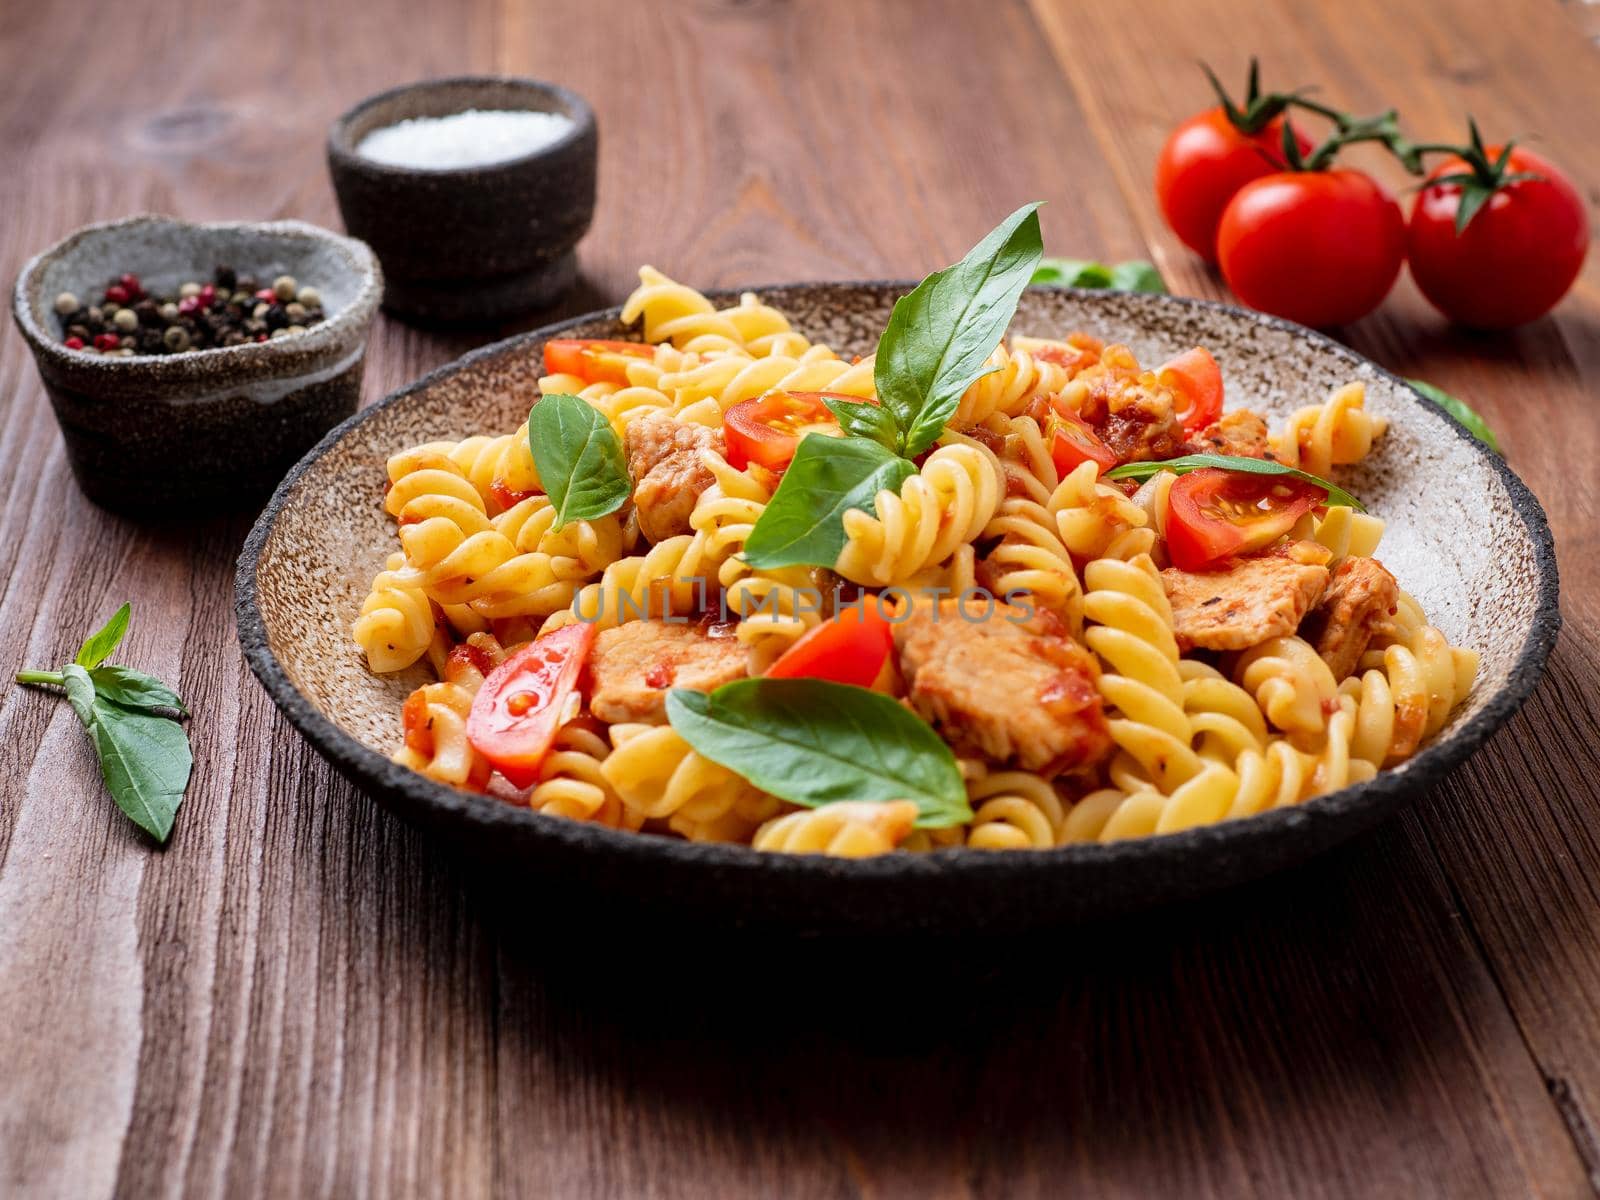 fusilli pasta with tomato sauce, chicken fillet with basil leaves on dark brown wooden background, cope space, side view.